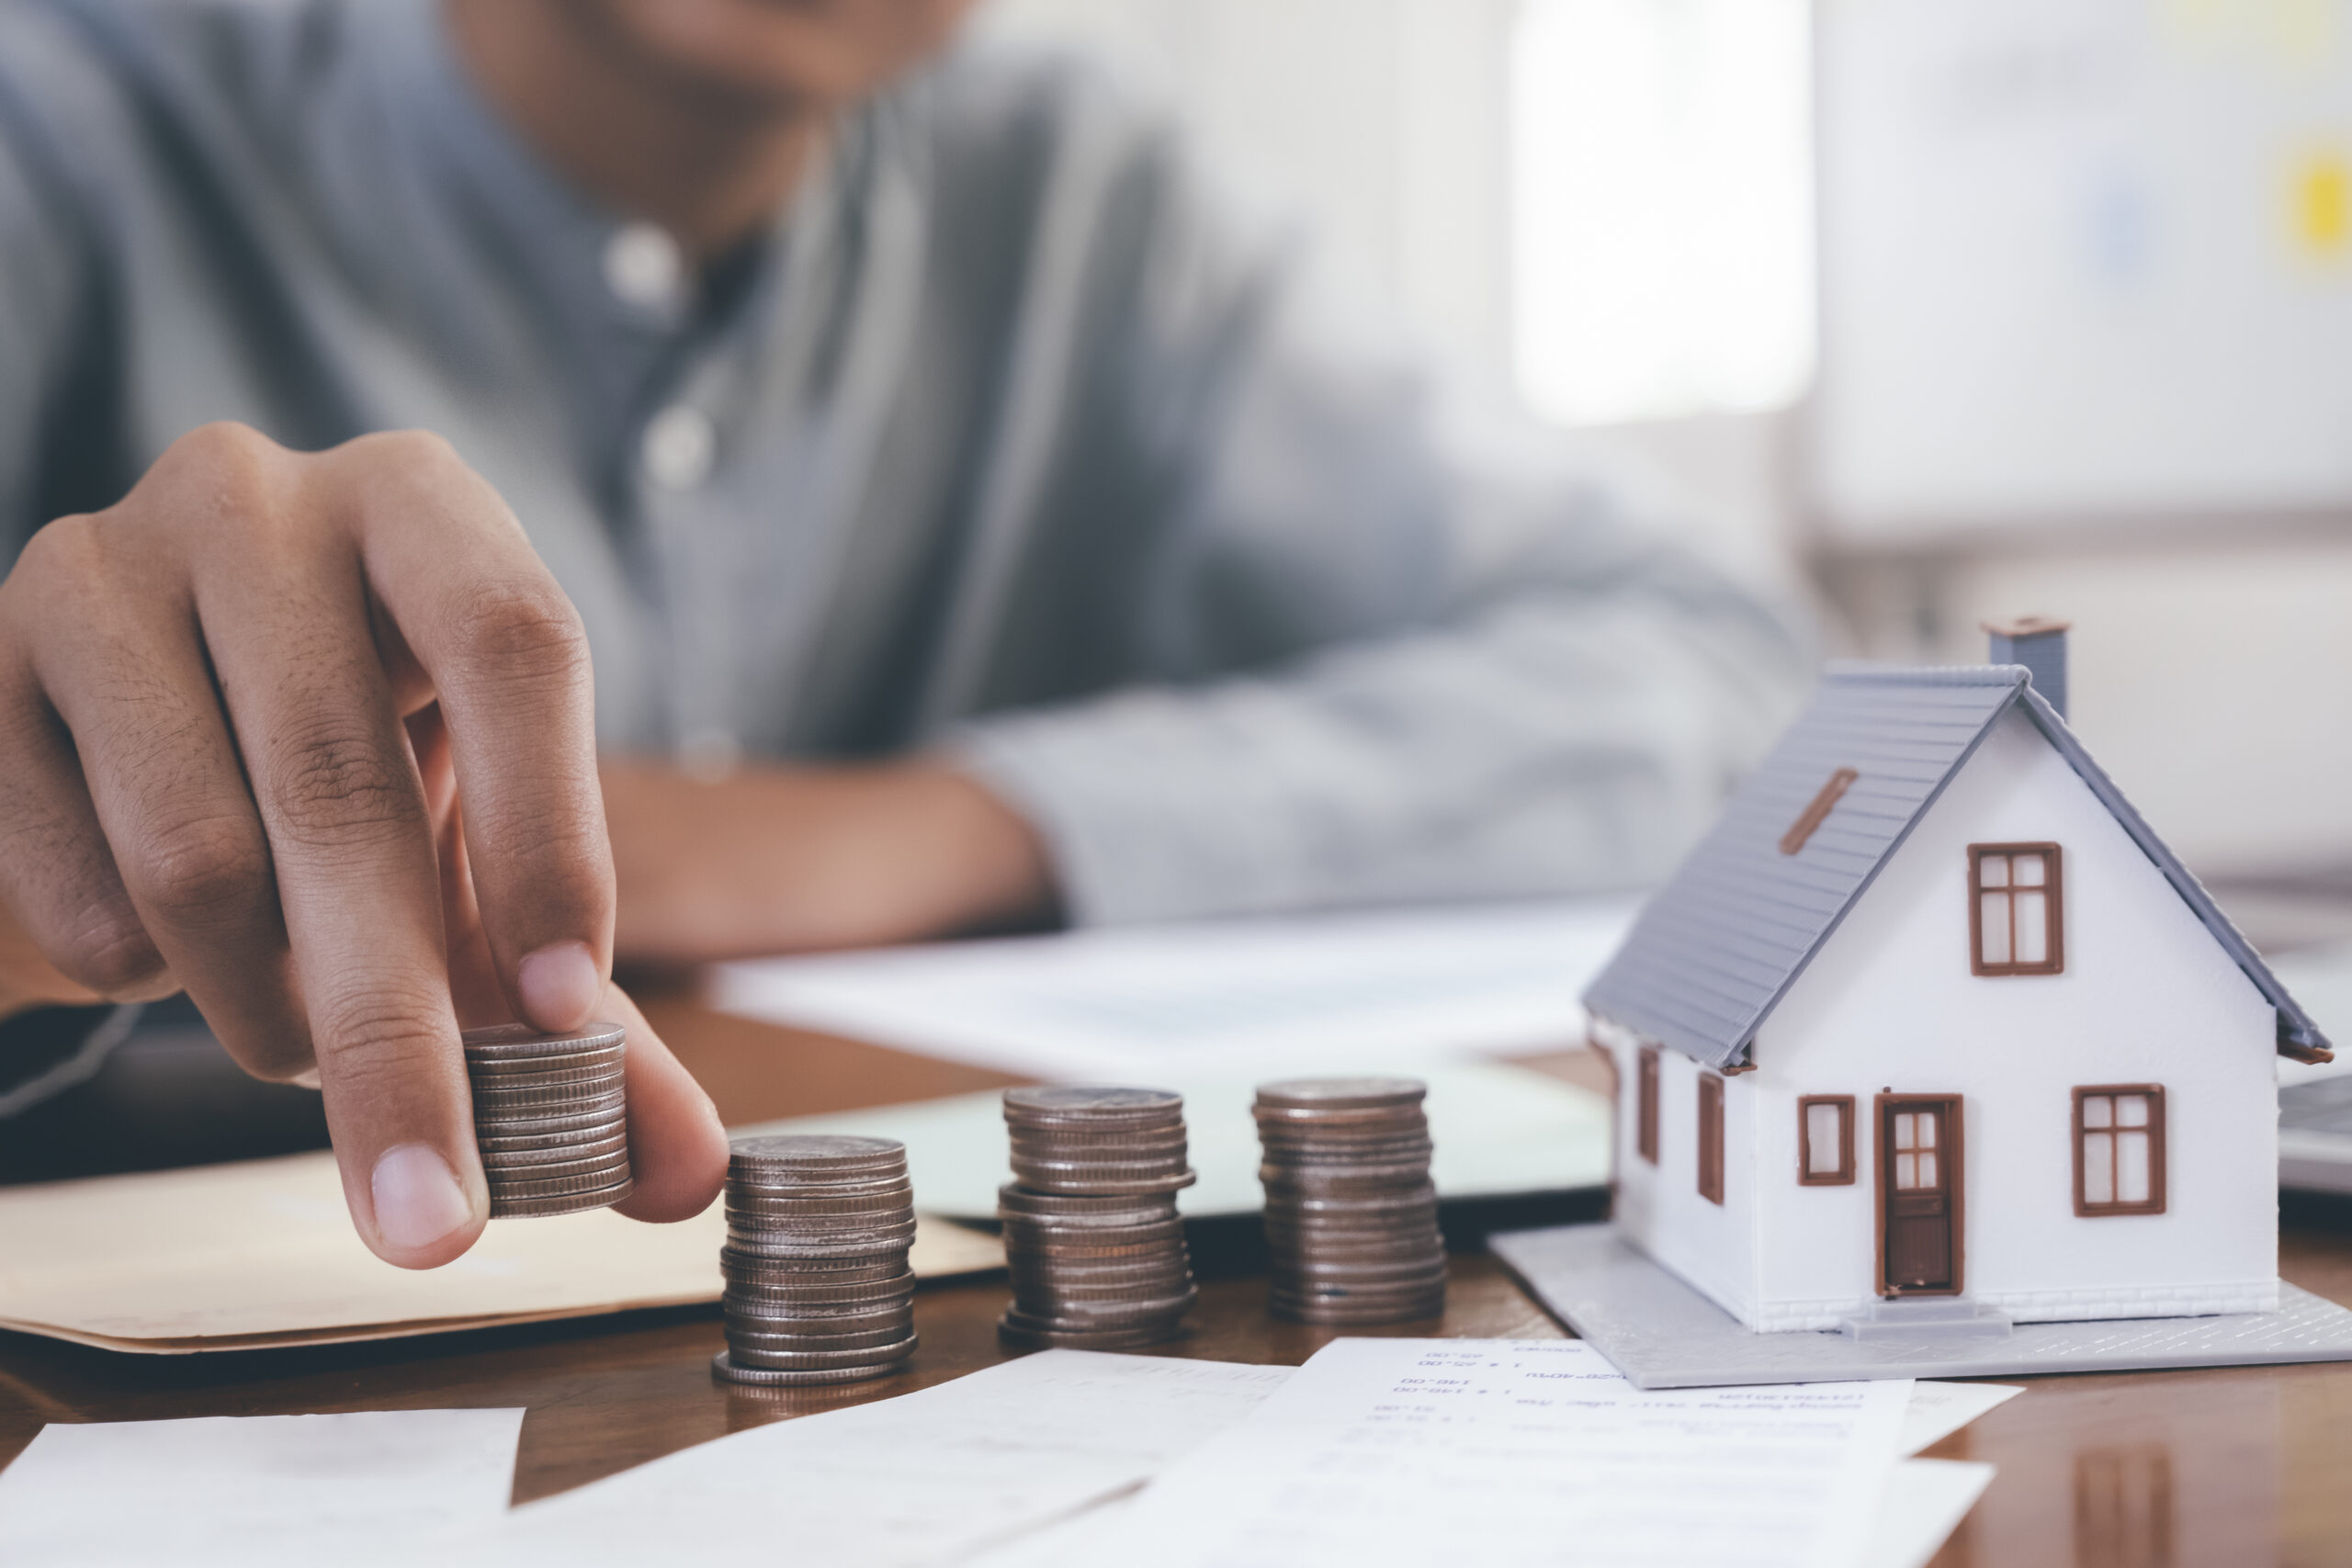 How to Consolidate My Debt Using a Second Mortgage?